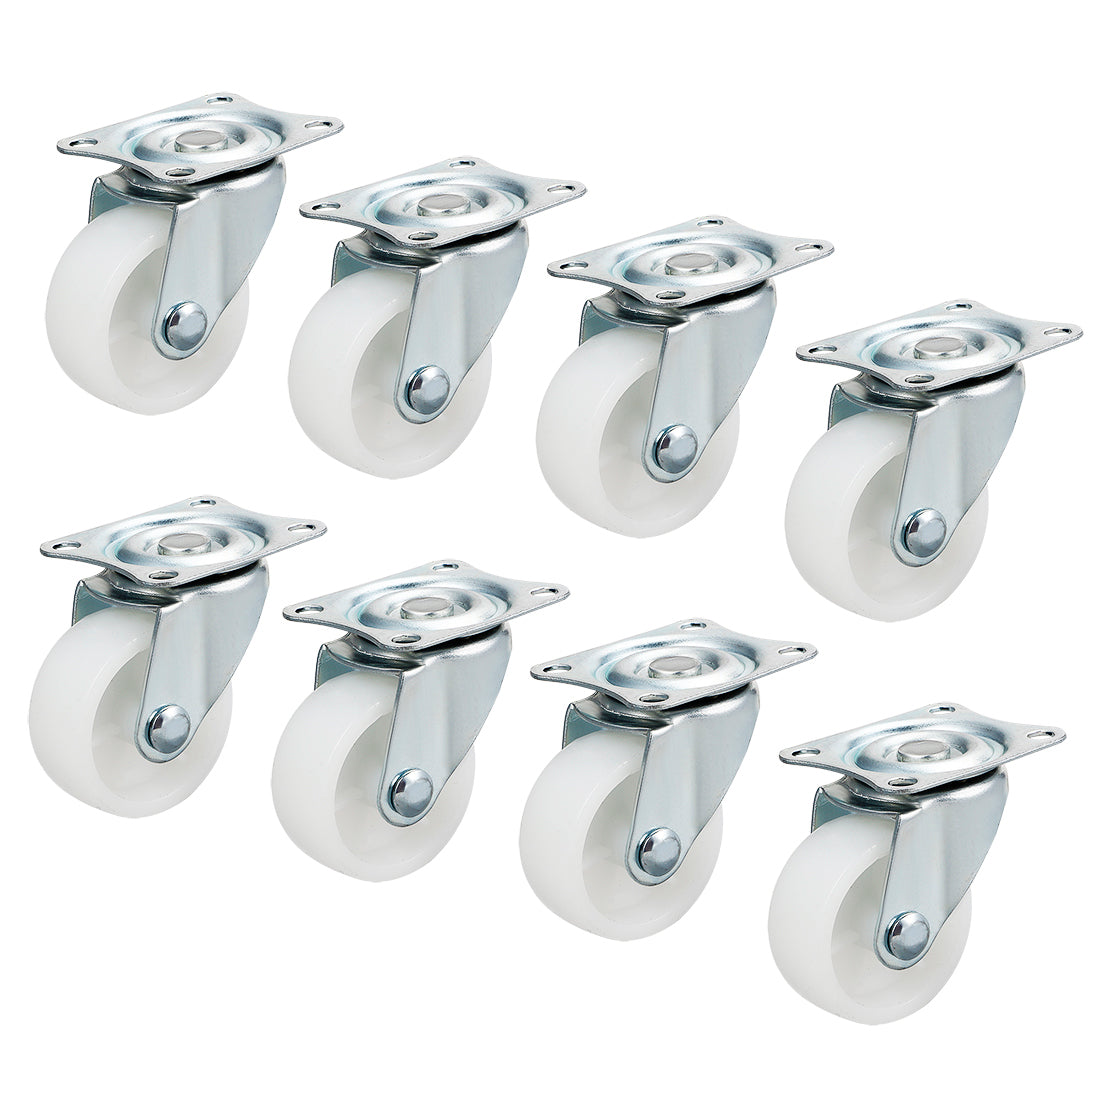 Uxcell Uxcell 8Pcs 1.5 Inch Swivel Casters Wheels PP Plastic Wheel Top Plate Mounted 44lb Load Capacity White